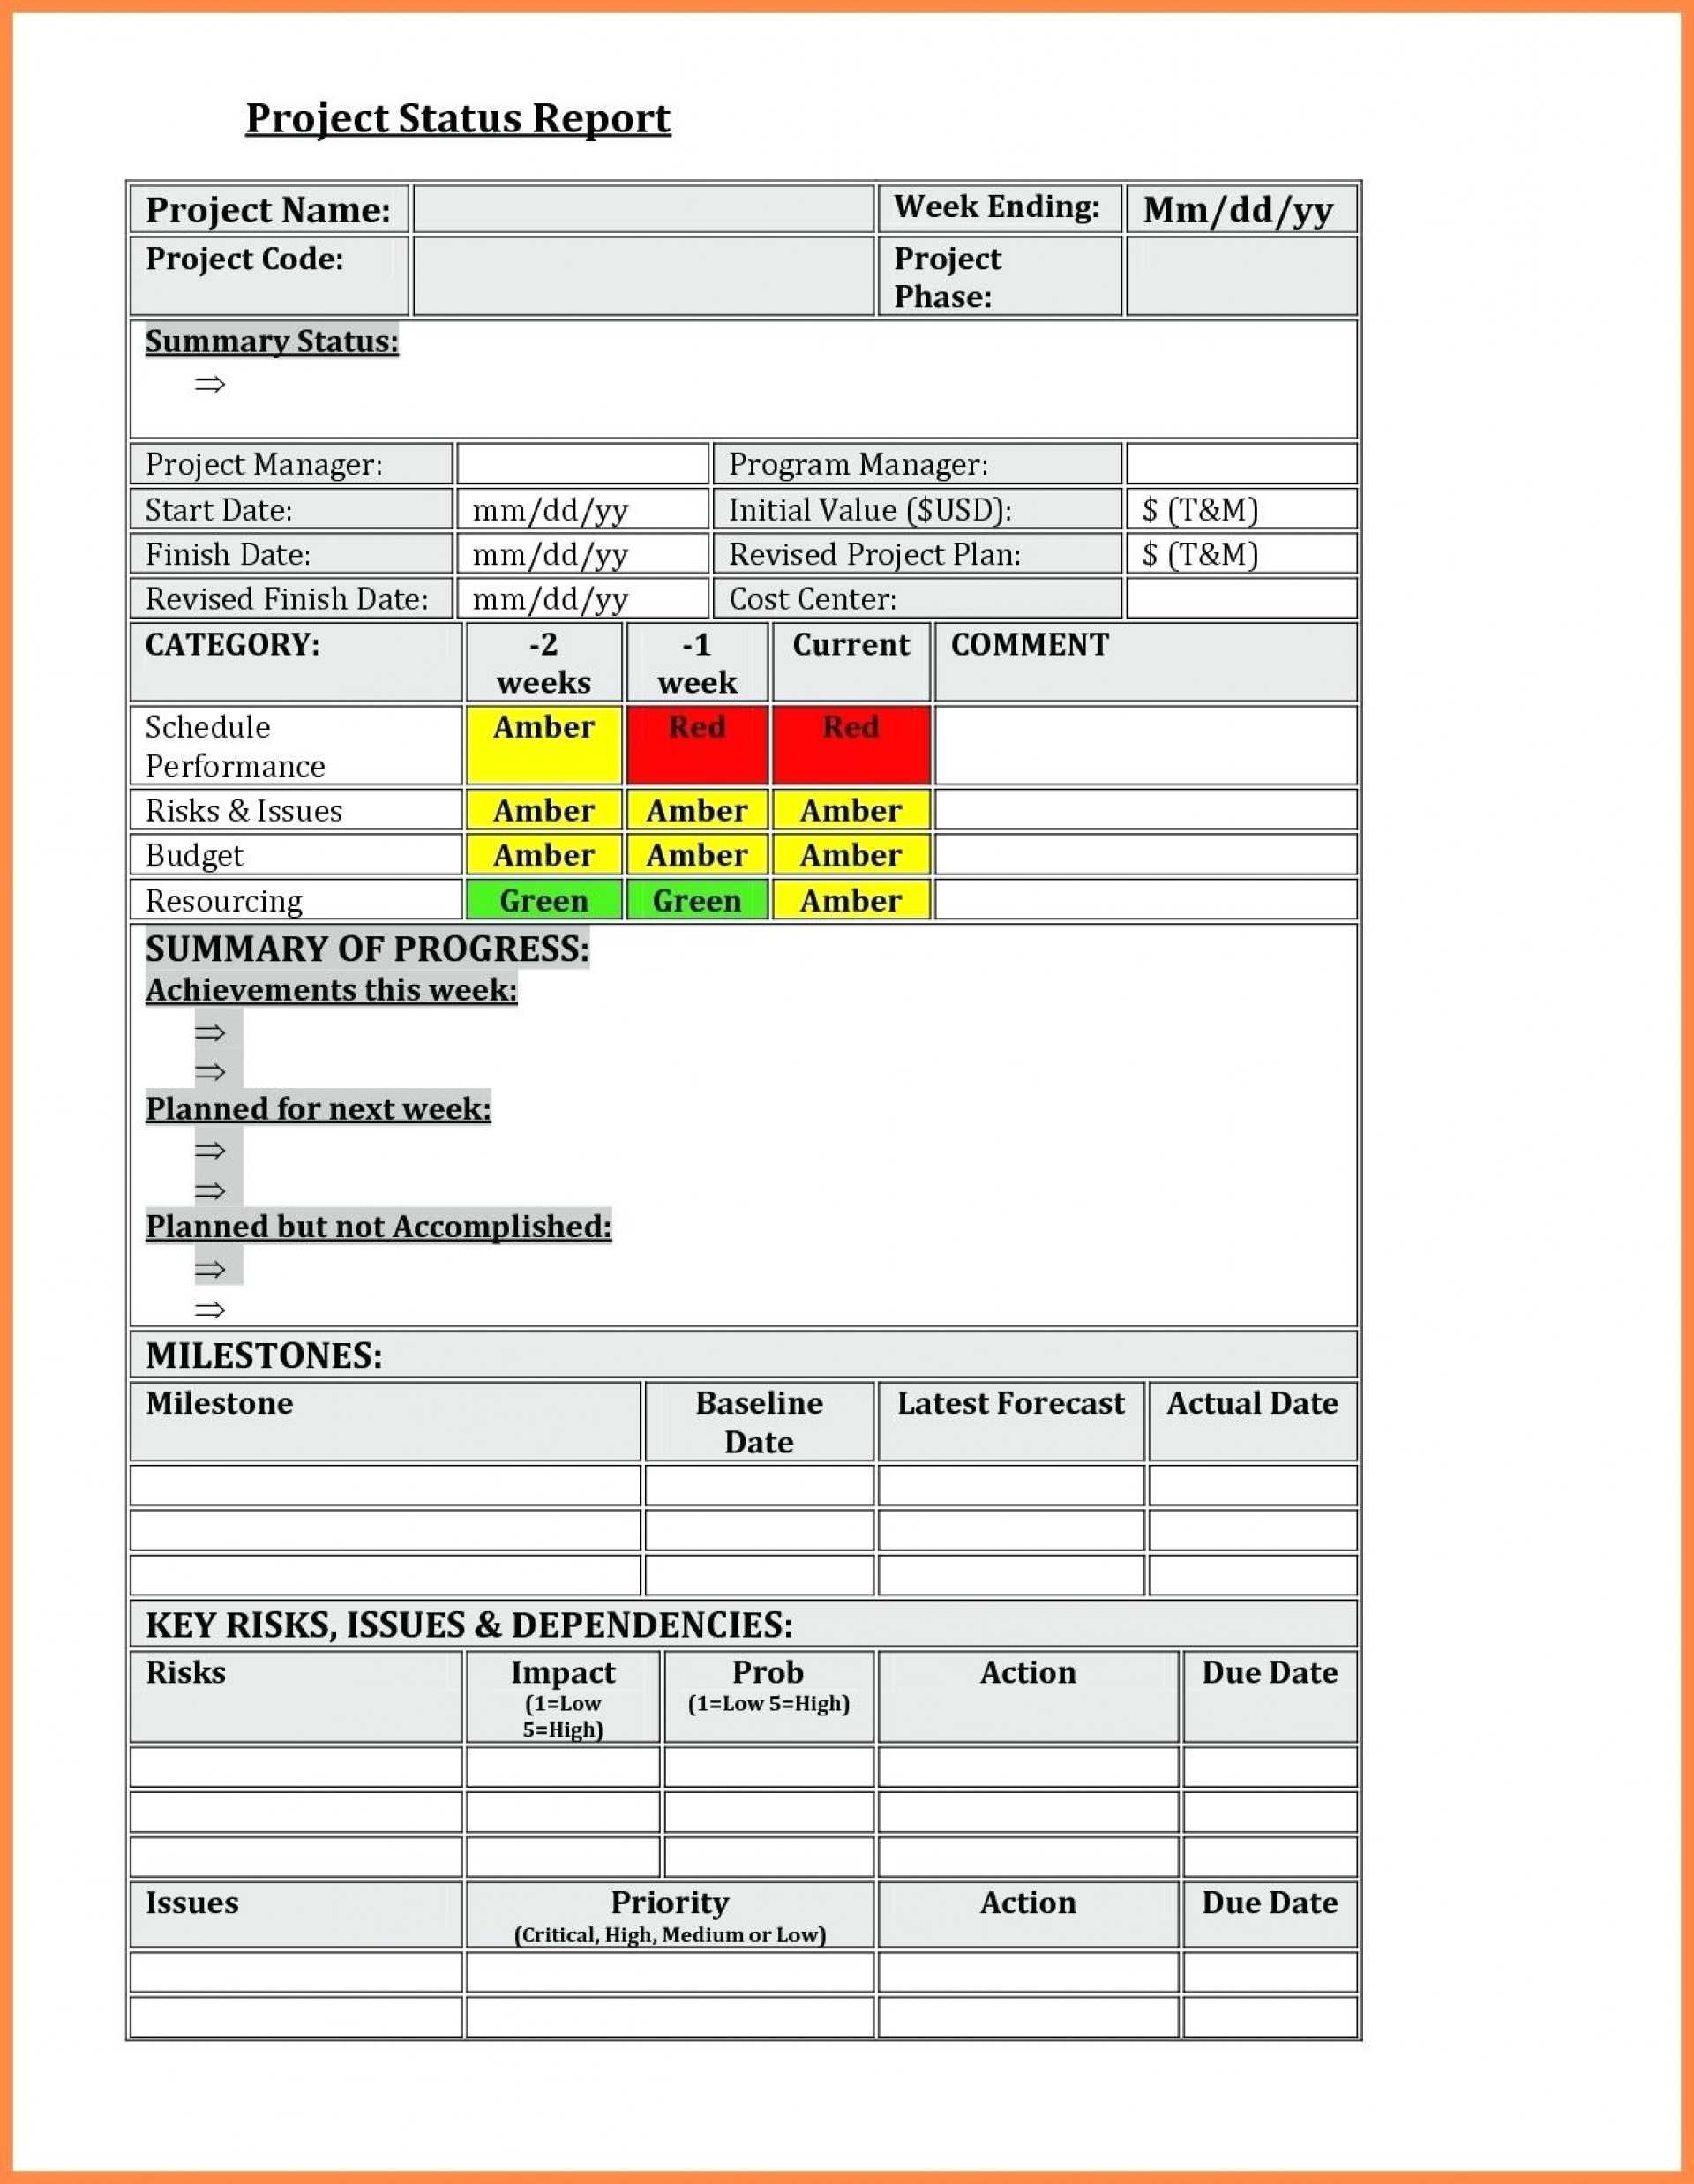 004 Status Report Template Ideas Impressive Weekly Format Regarding Weekly Progress Report Template Project Management